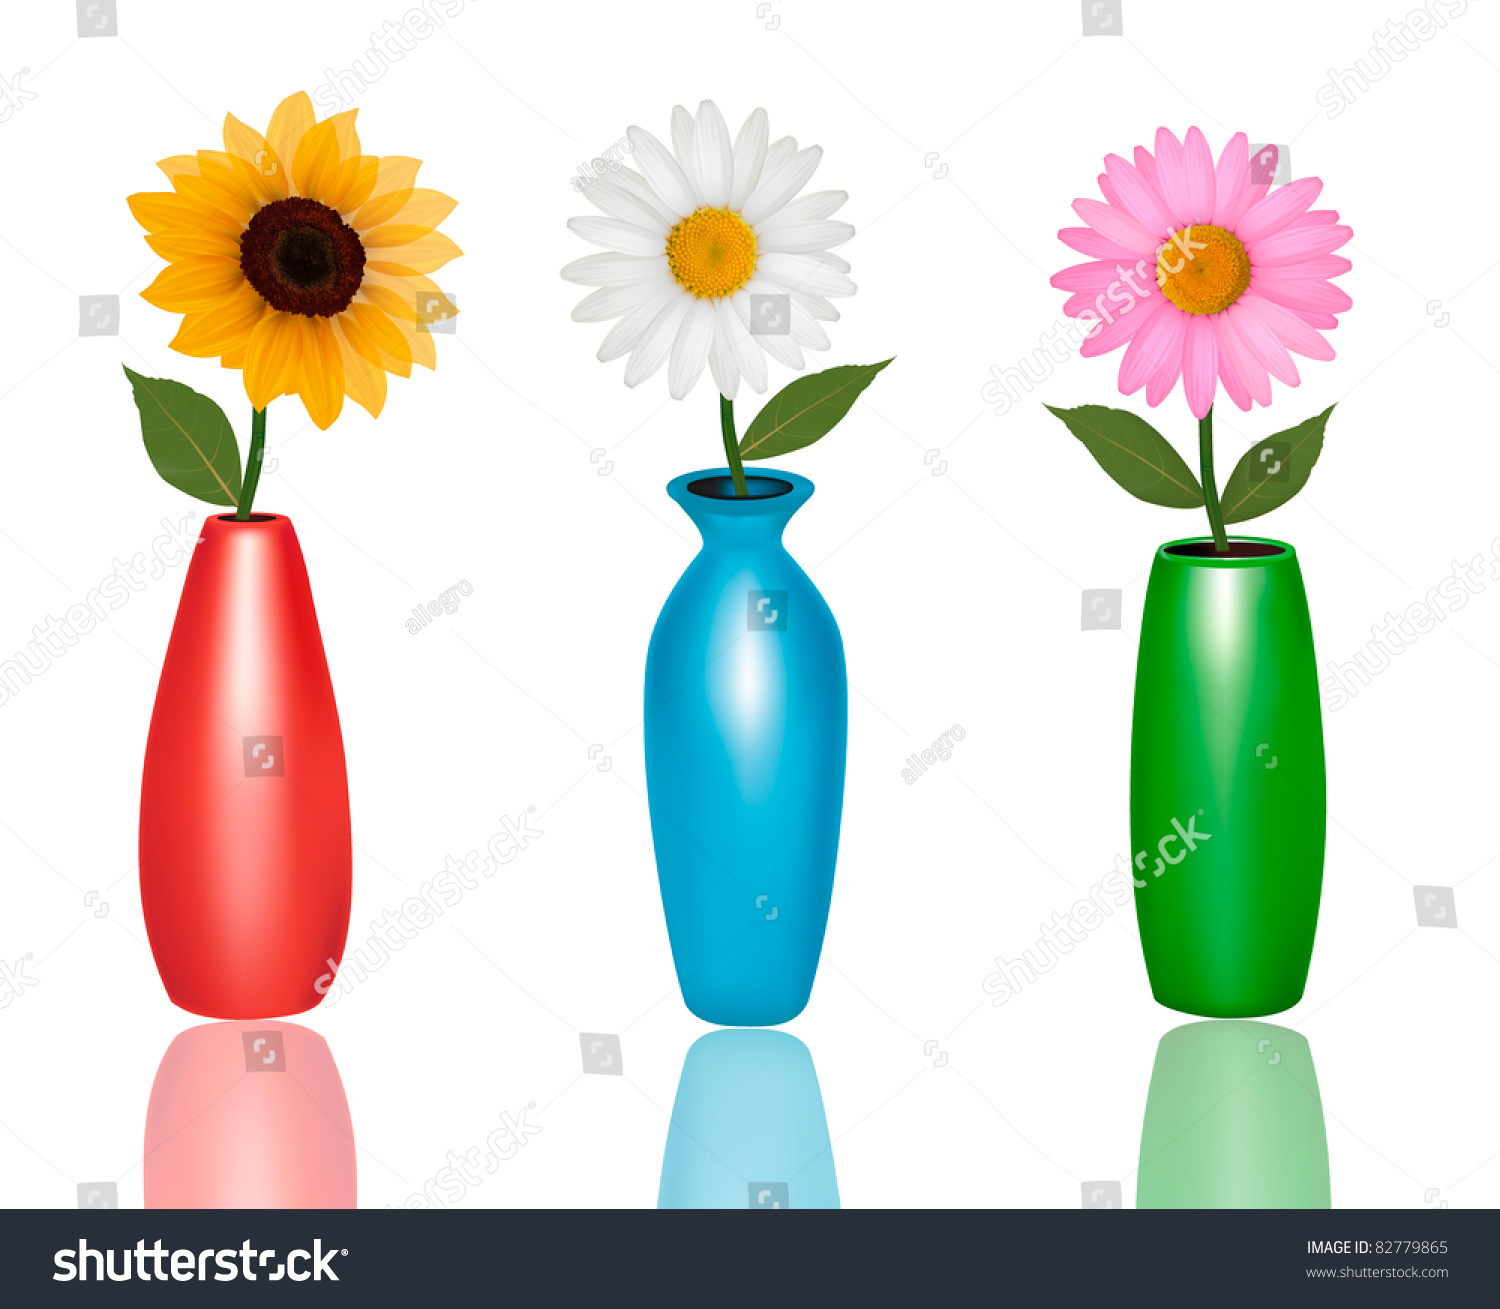 Flowers In Vases Isolated On White Background. Vector. - 82779865